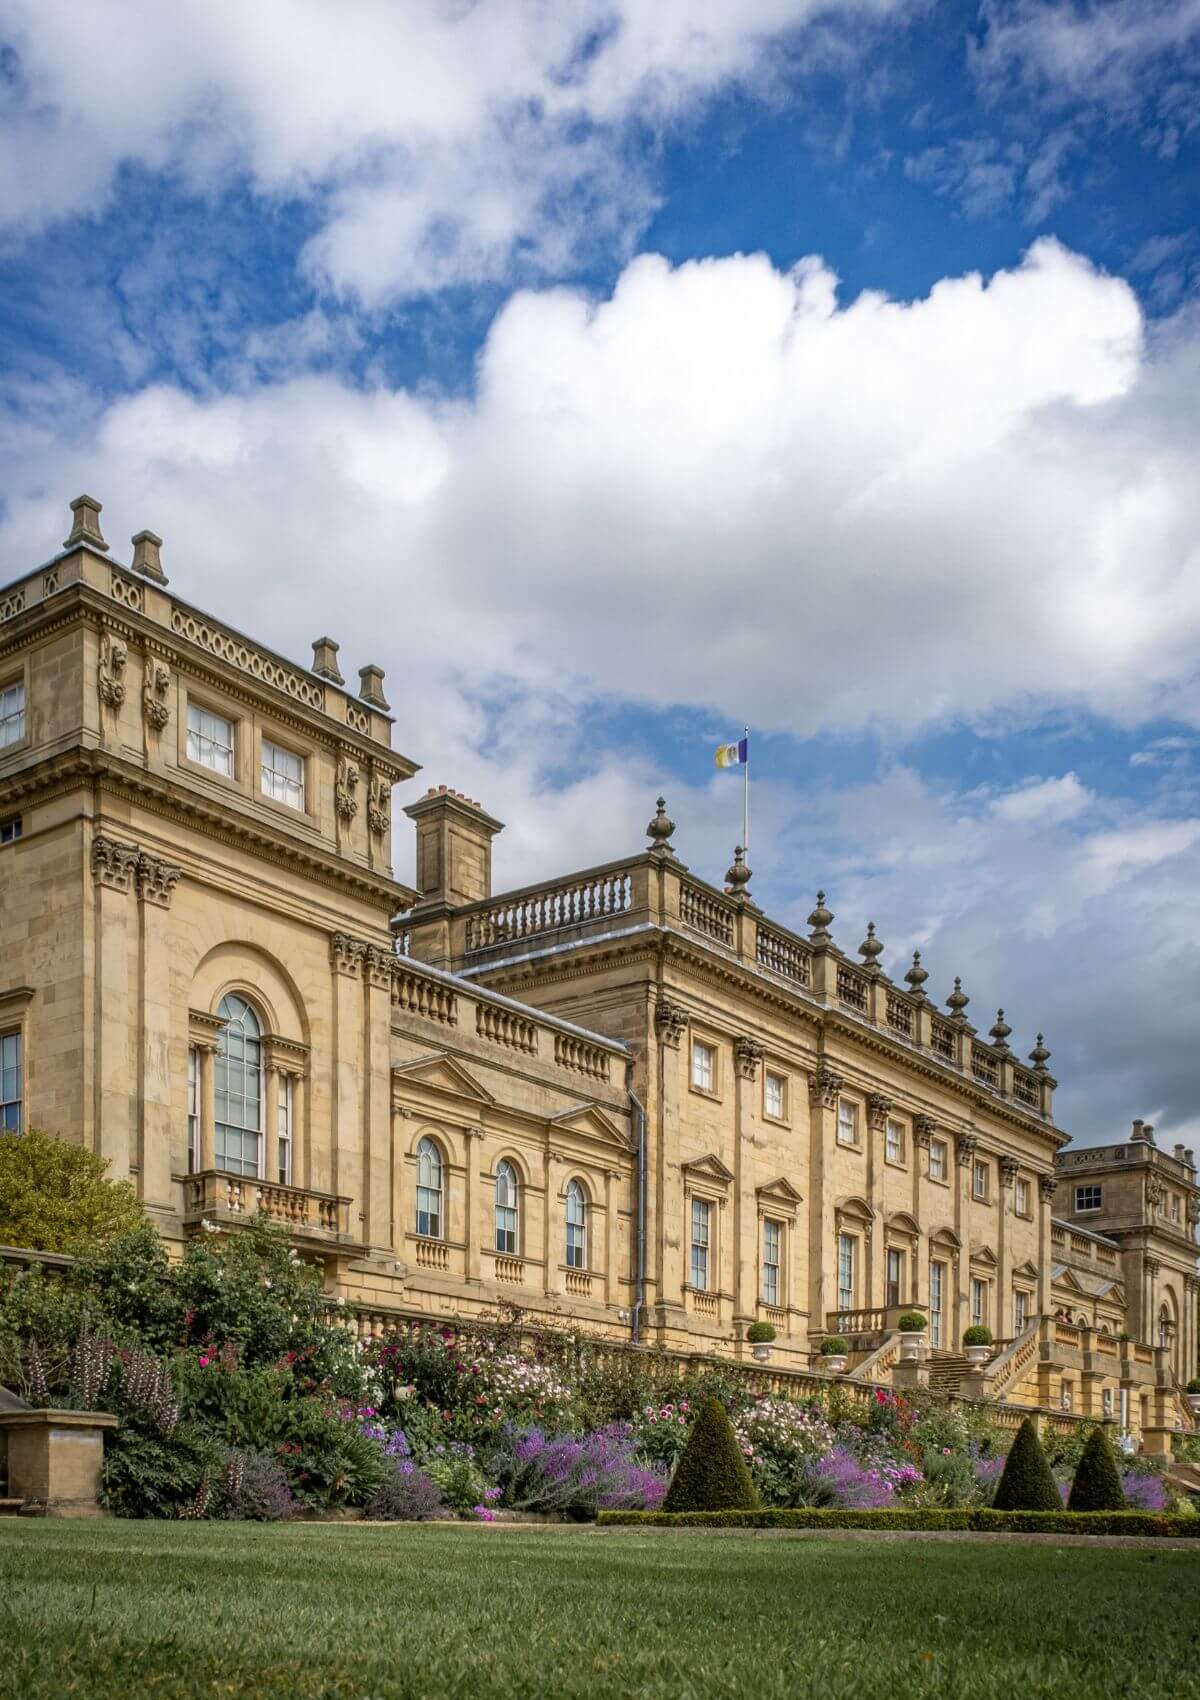 Day out to Harewood House in Leeds